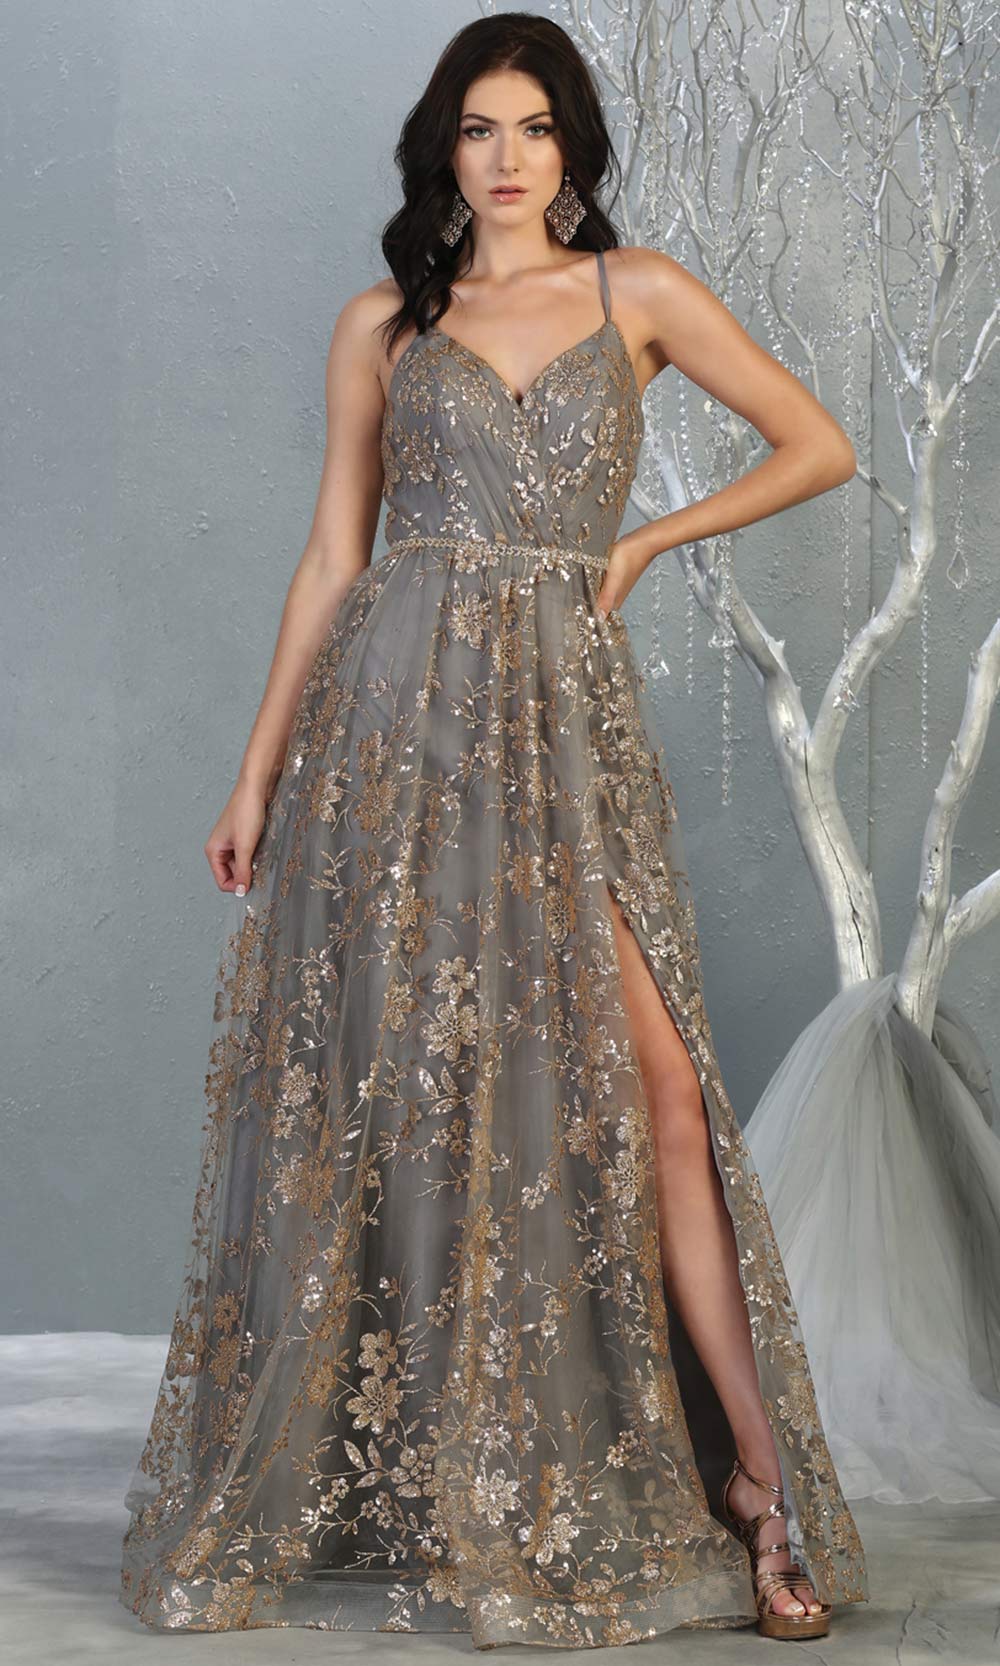 Mayqueen MQ1787 long charcoal gold evening flowy tulle dress. Full length light gold glittery gown w/open back is perfect for  enagagement/e-shoot dress, formal wedding guest, indowestern gown, evening party dress, prom, bridesmaid. Plus sizes avail.jpg